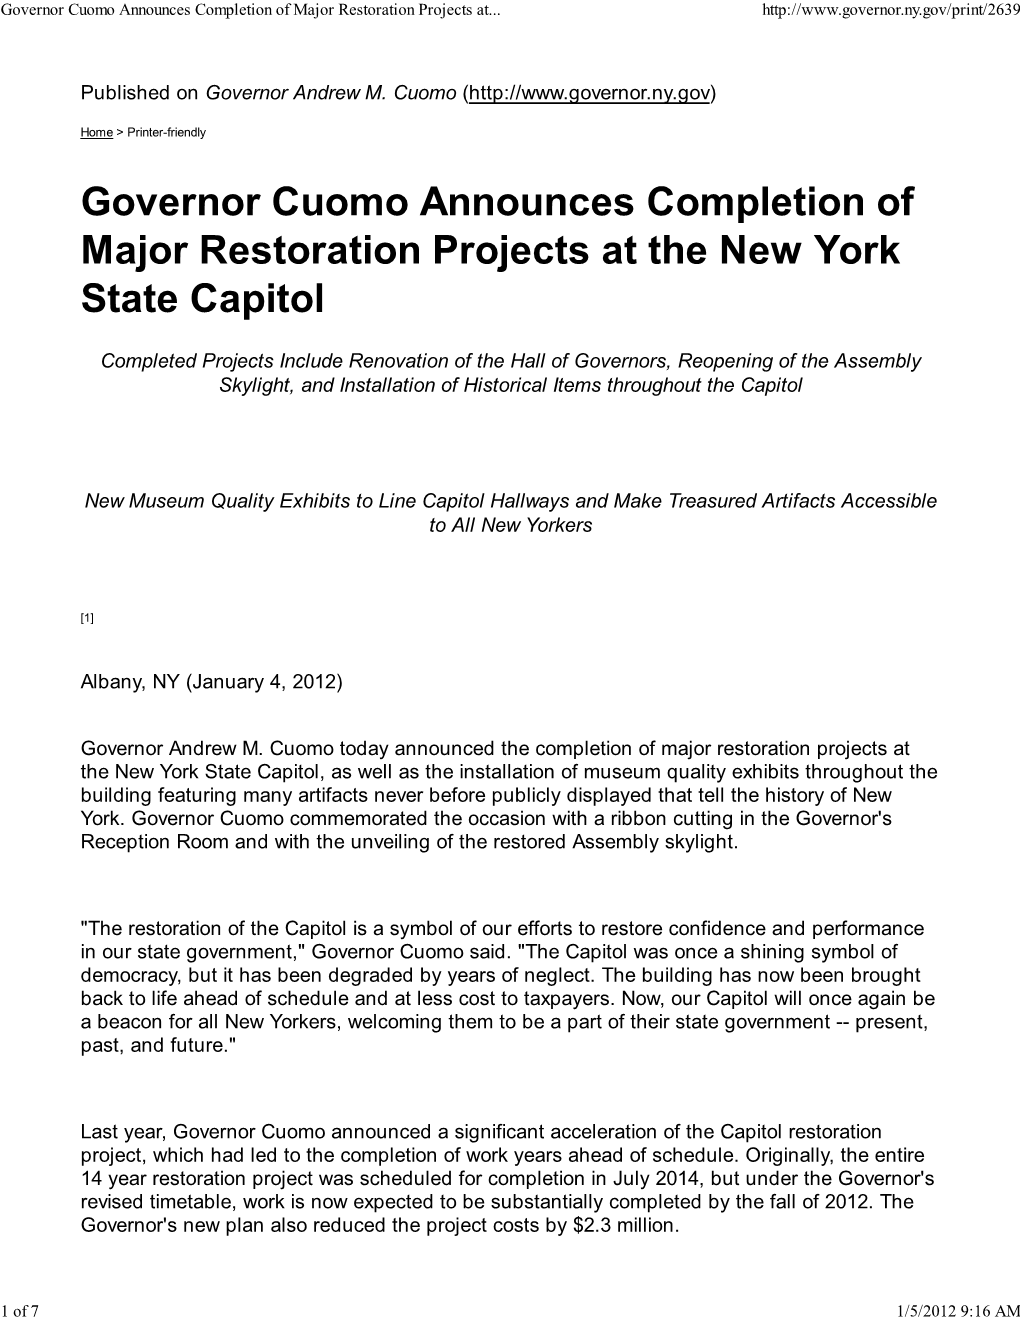 Governor Cuomo Announces Completion of Major Restoration Projects at the New York State Capitol